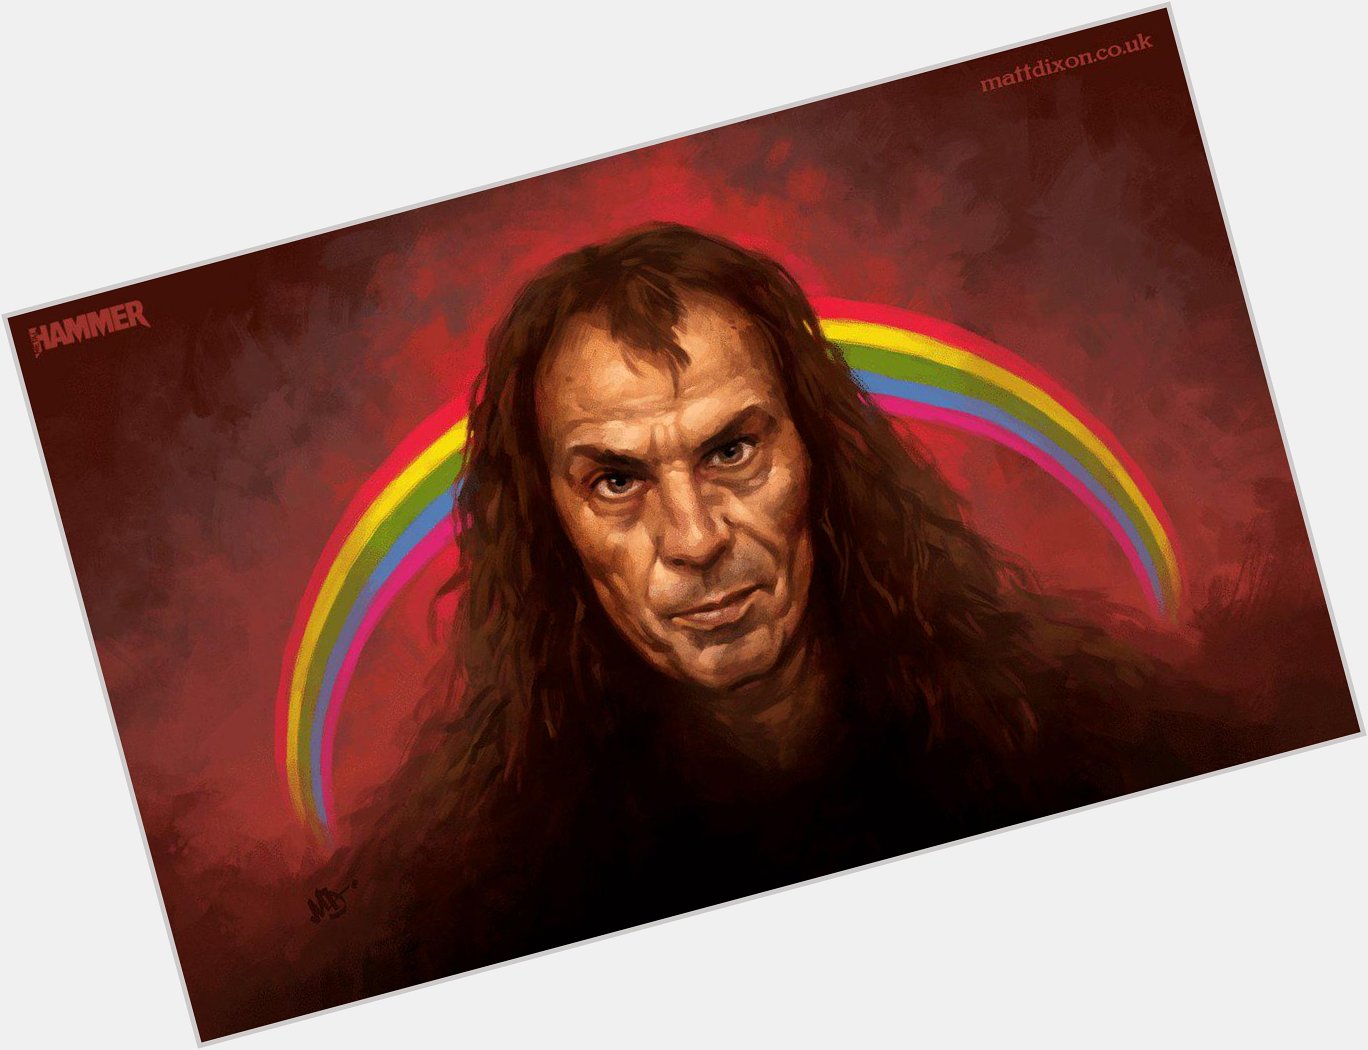 Happy Birthday to the imortal Mr. Ronnie James Dio, the greatest voice of the history of Heavy Metal. 